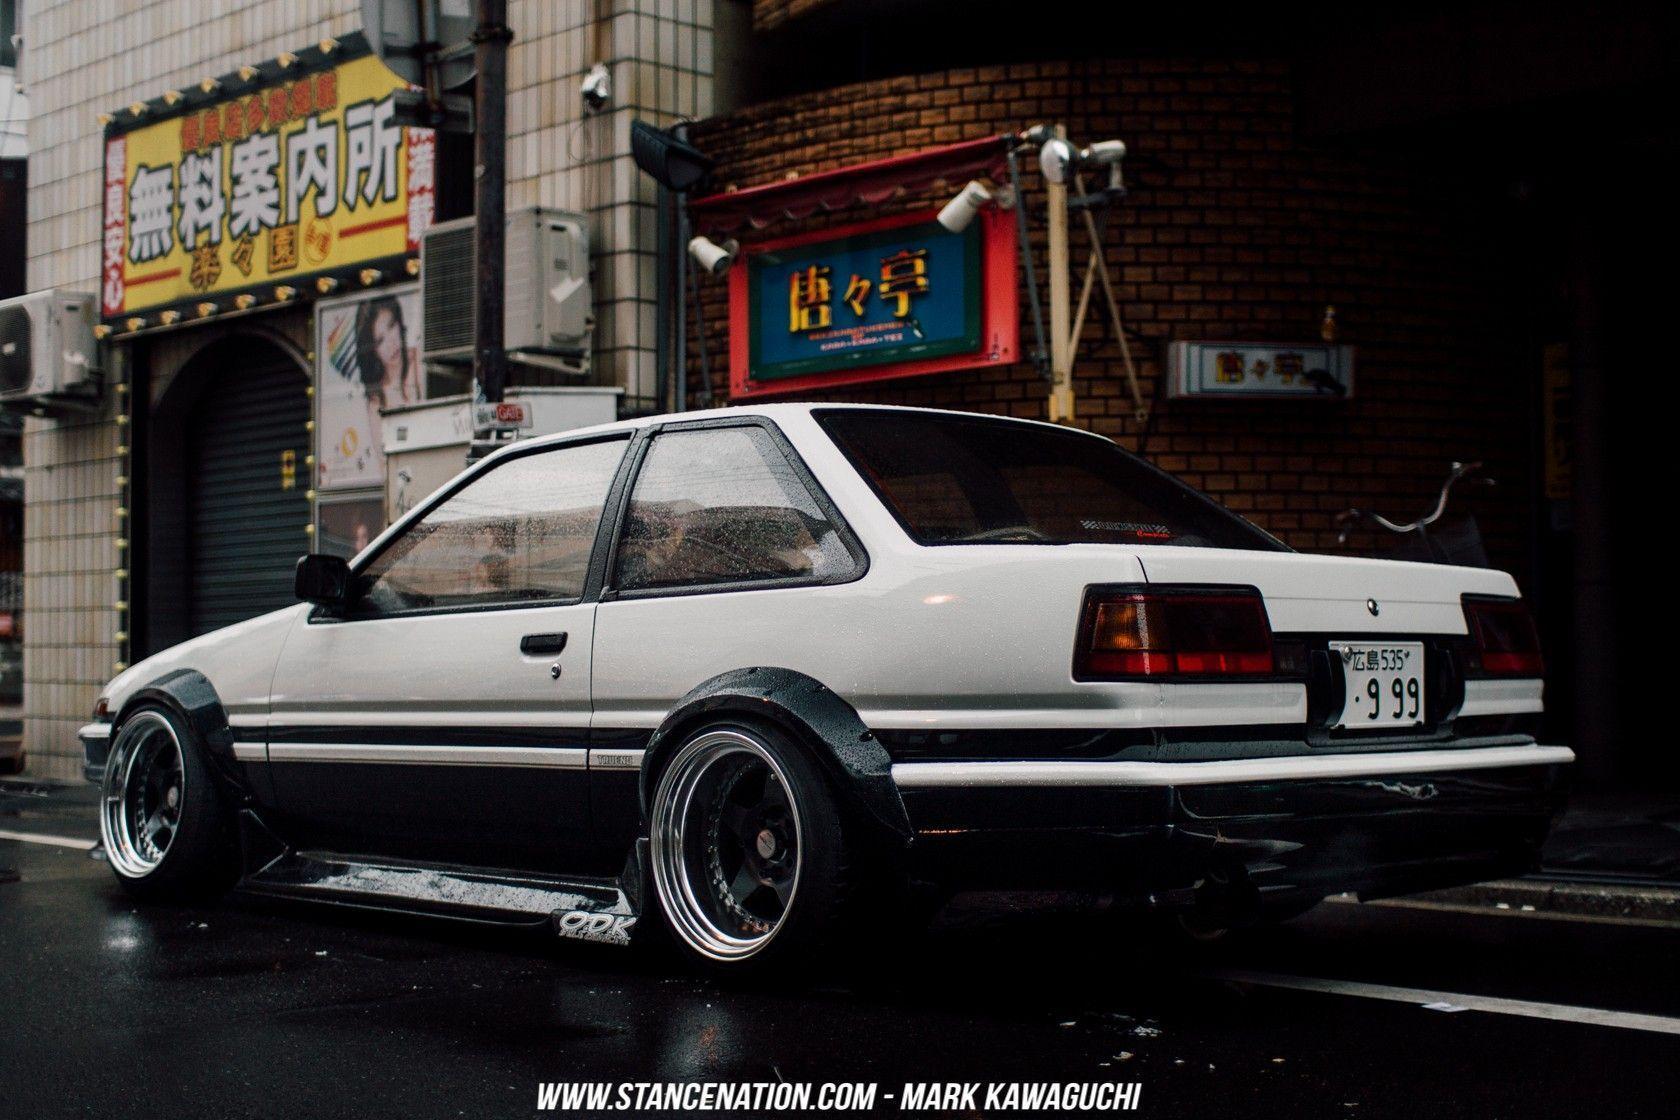 A classic stance car with a nice stance - Toyota AE86